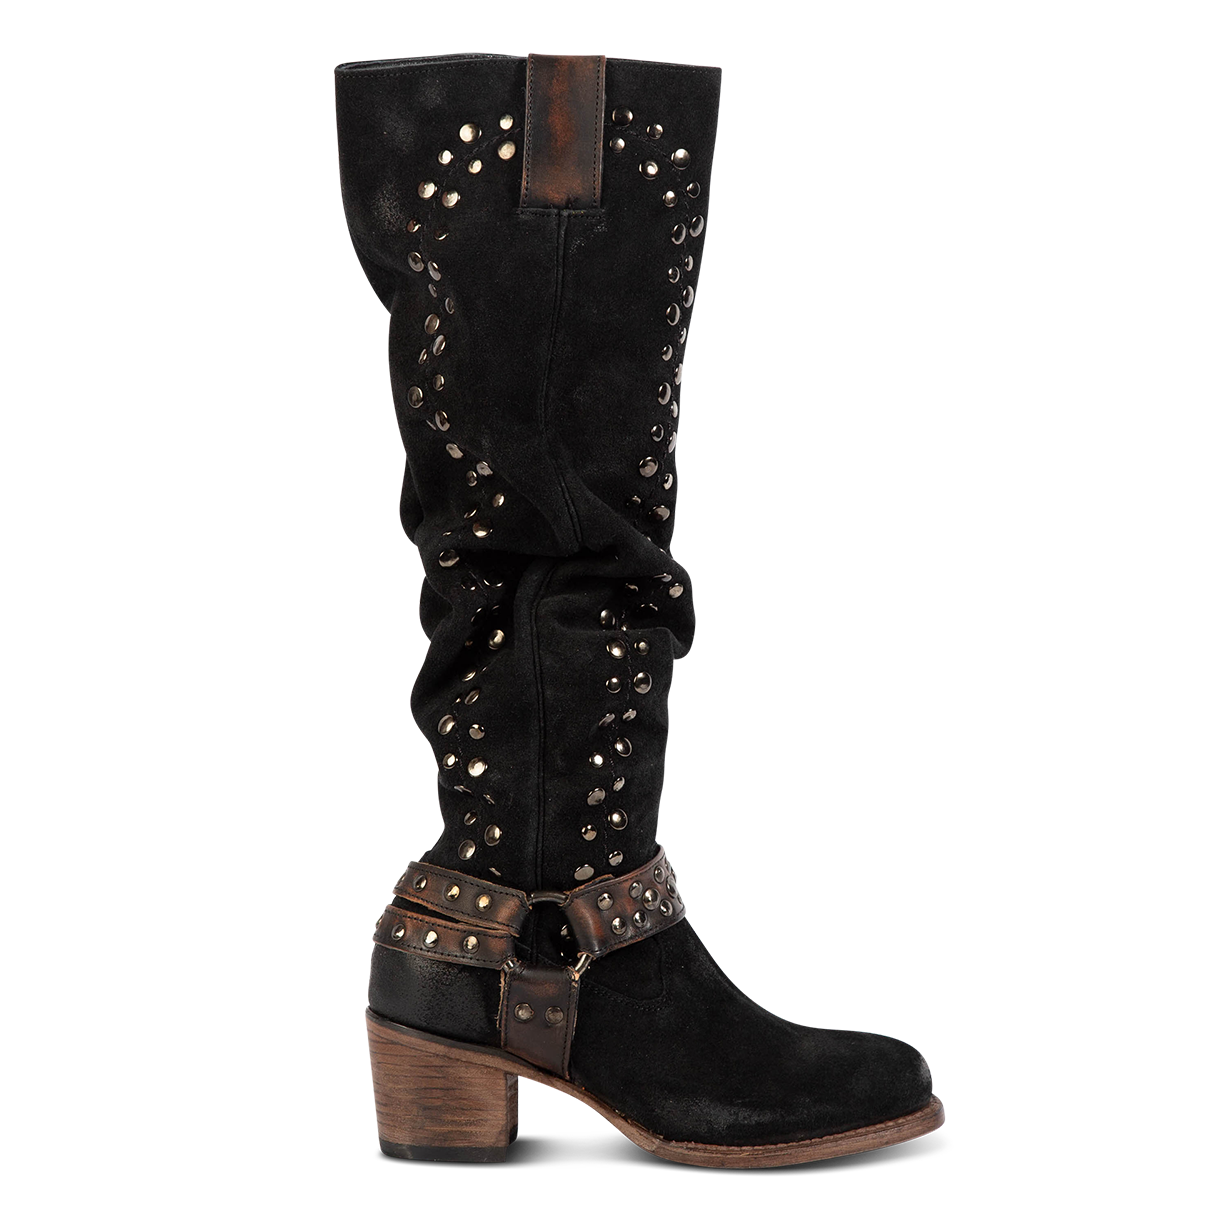 FREEBIRD women's Daisy black knee high suede boot with inside zip closure and stud detailing